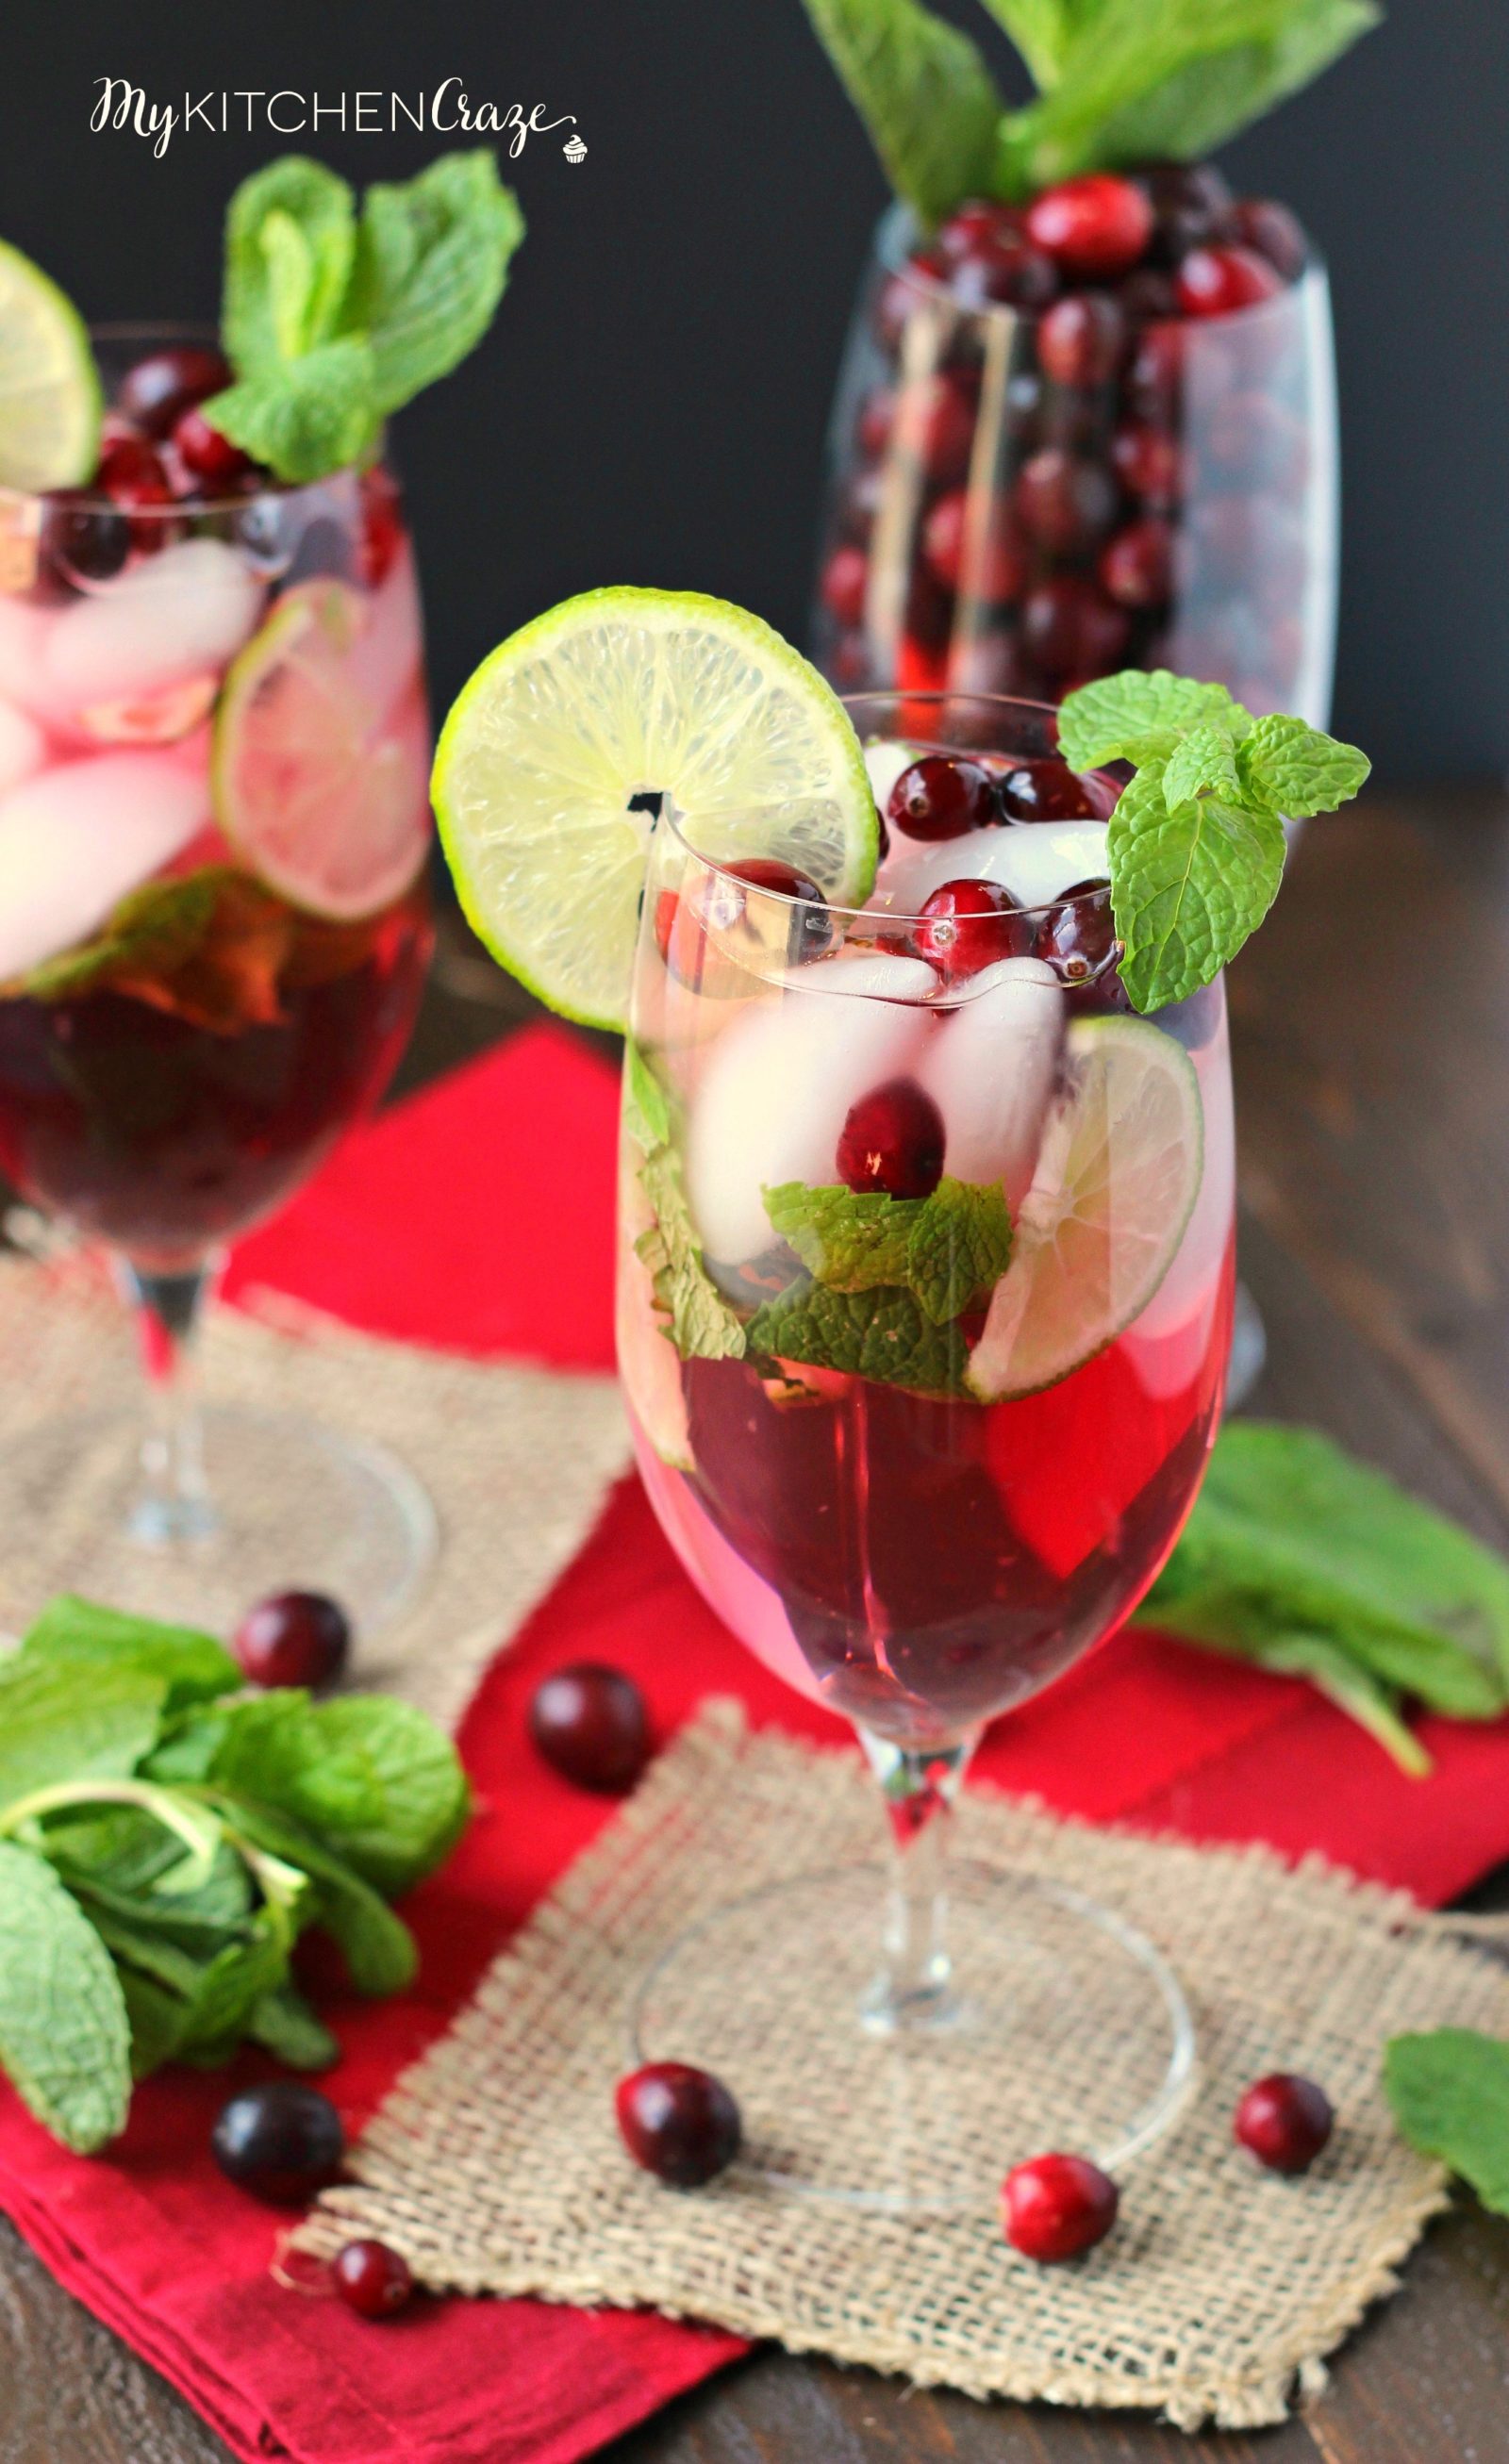 Cranberry Mojito ~ mykitchencraze.com ~ A refreshing and delicious drink for your holiday parties!